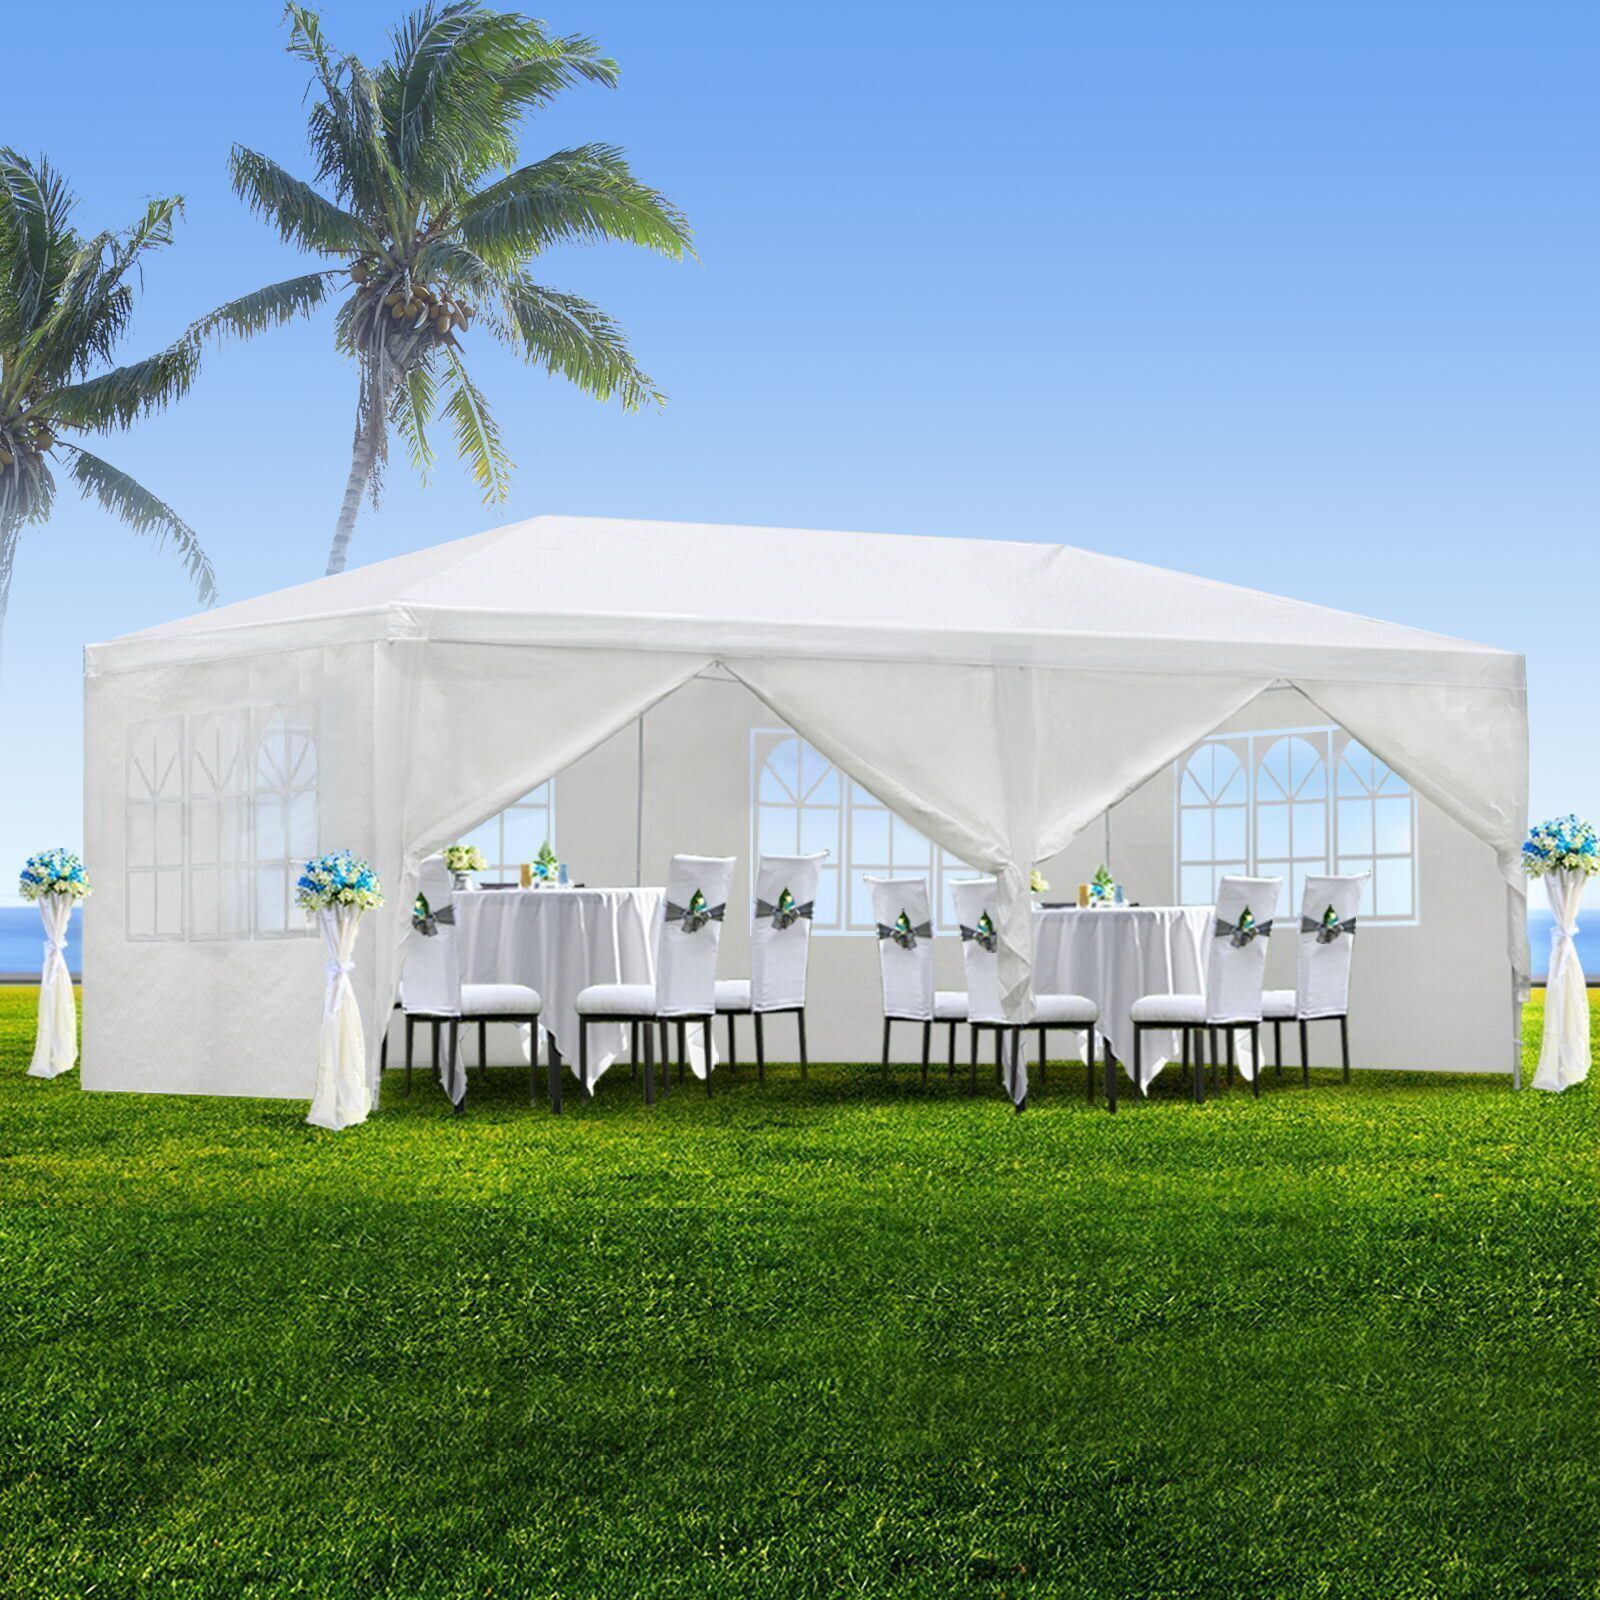 Canopy Wedding Party Tent 6 Removable Window Walls (fast shipping usa 3/5 Days 100%.)